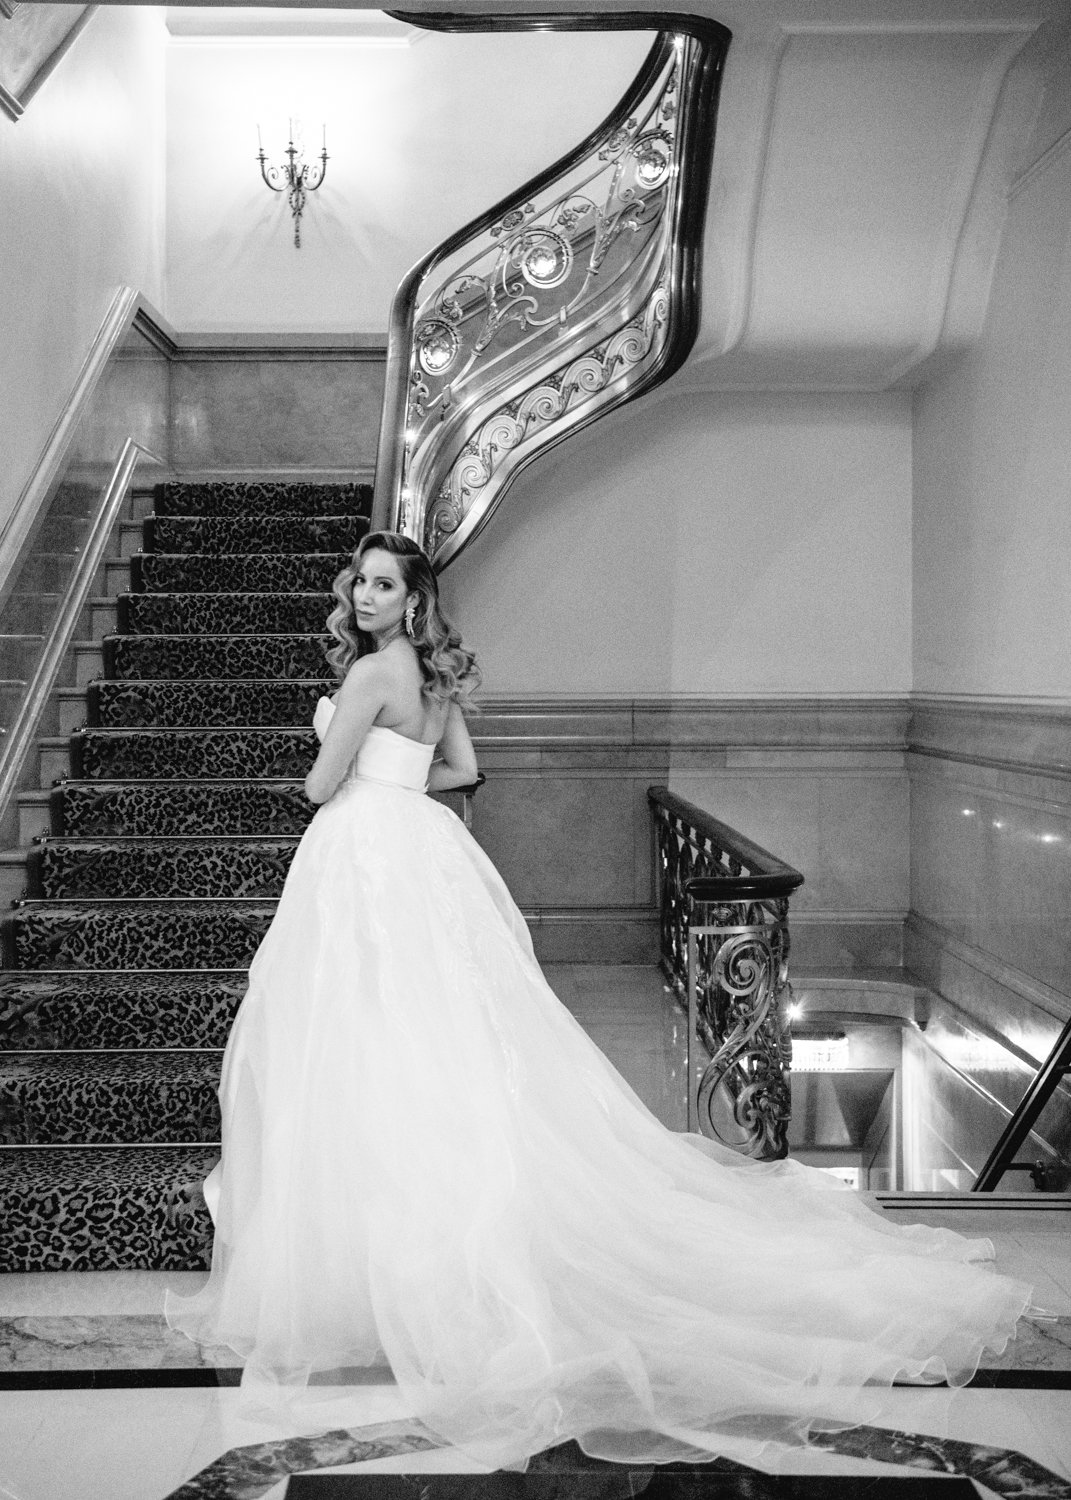 Bride stands at the bottom of a grand staircase in the St. Regis in Manhattan. Her train is flowing behind her.

Manhattan Luxury Wedding. New York Luxury Wedding Photographer. Wedding in Manhattan. NYC Luxury Wedding.